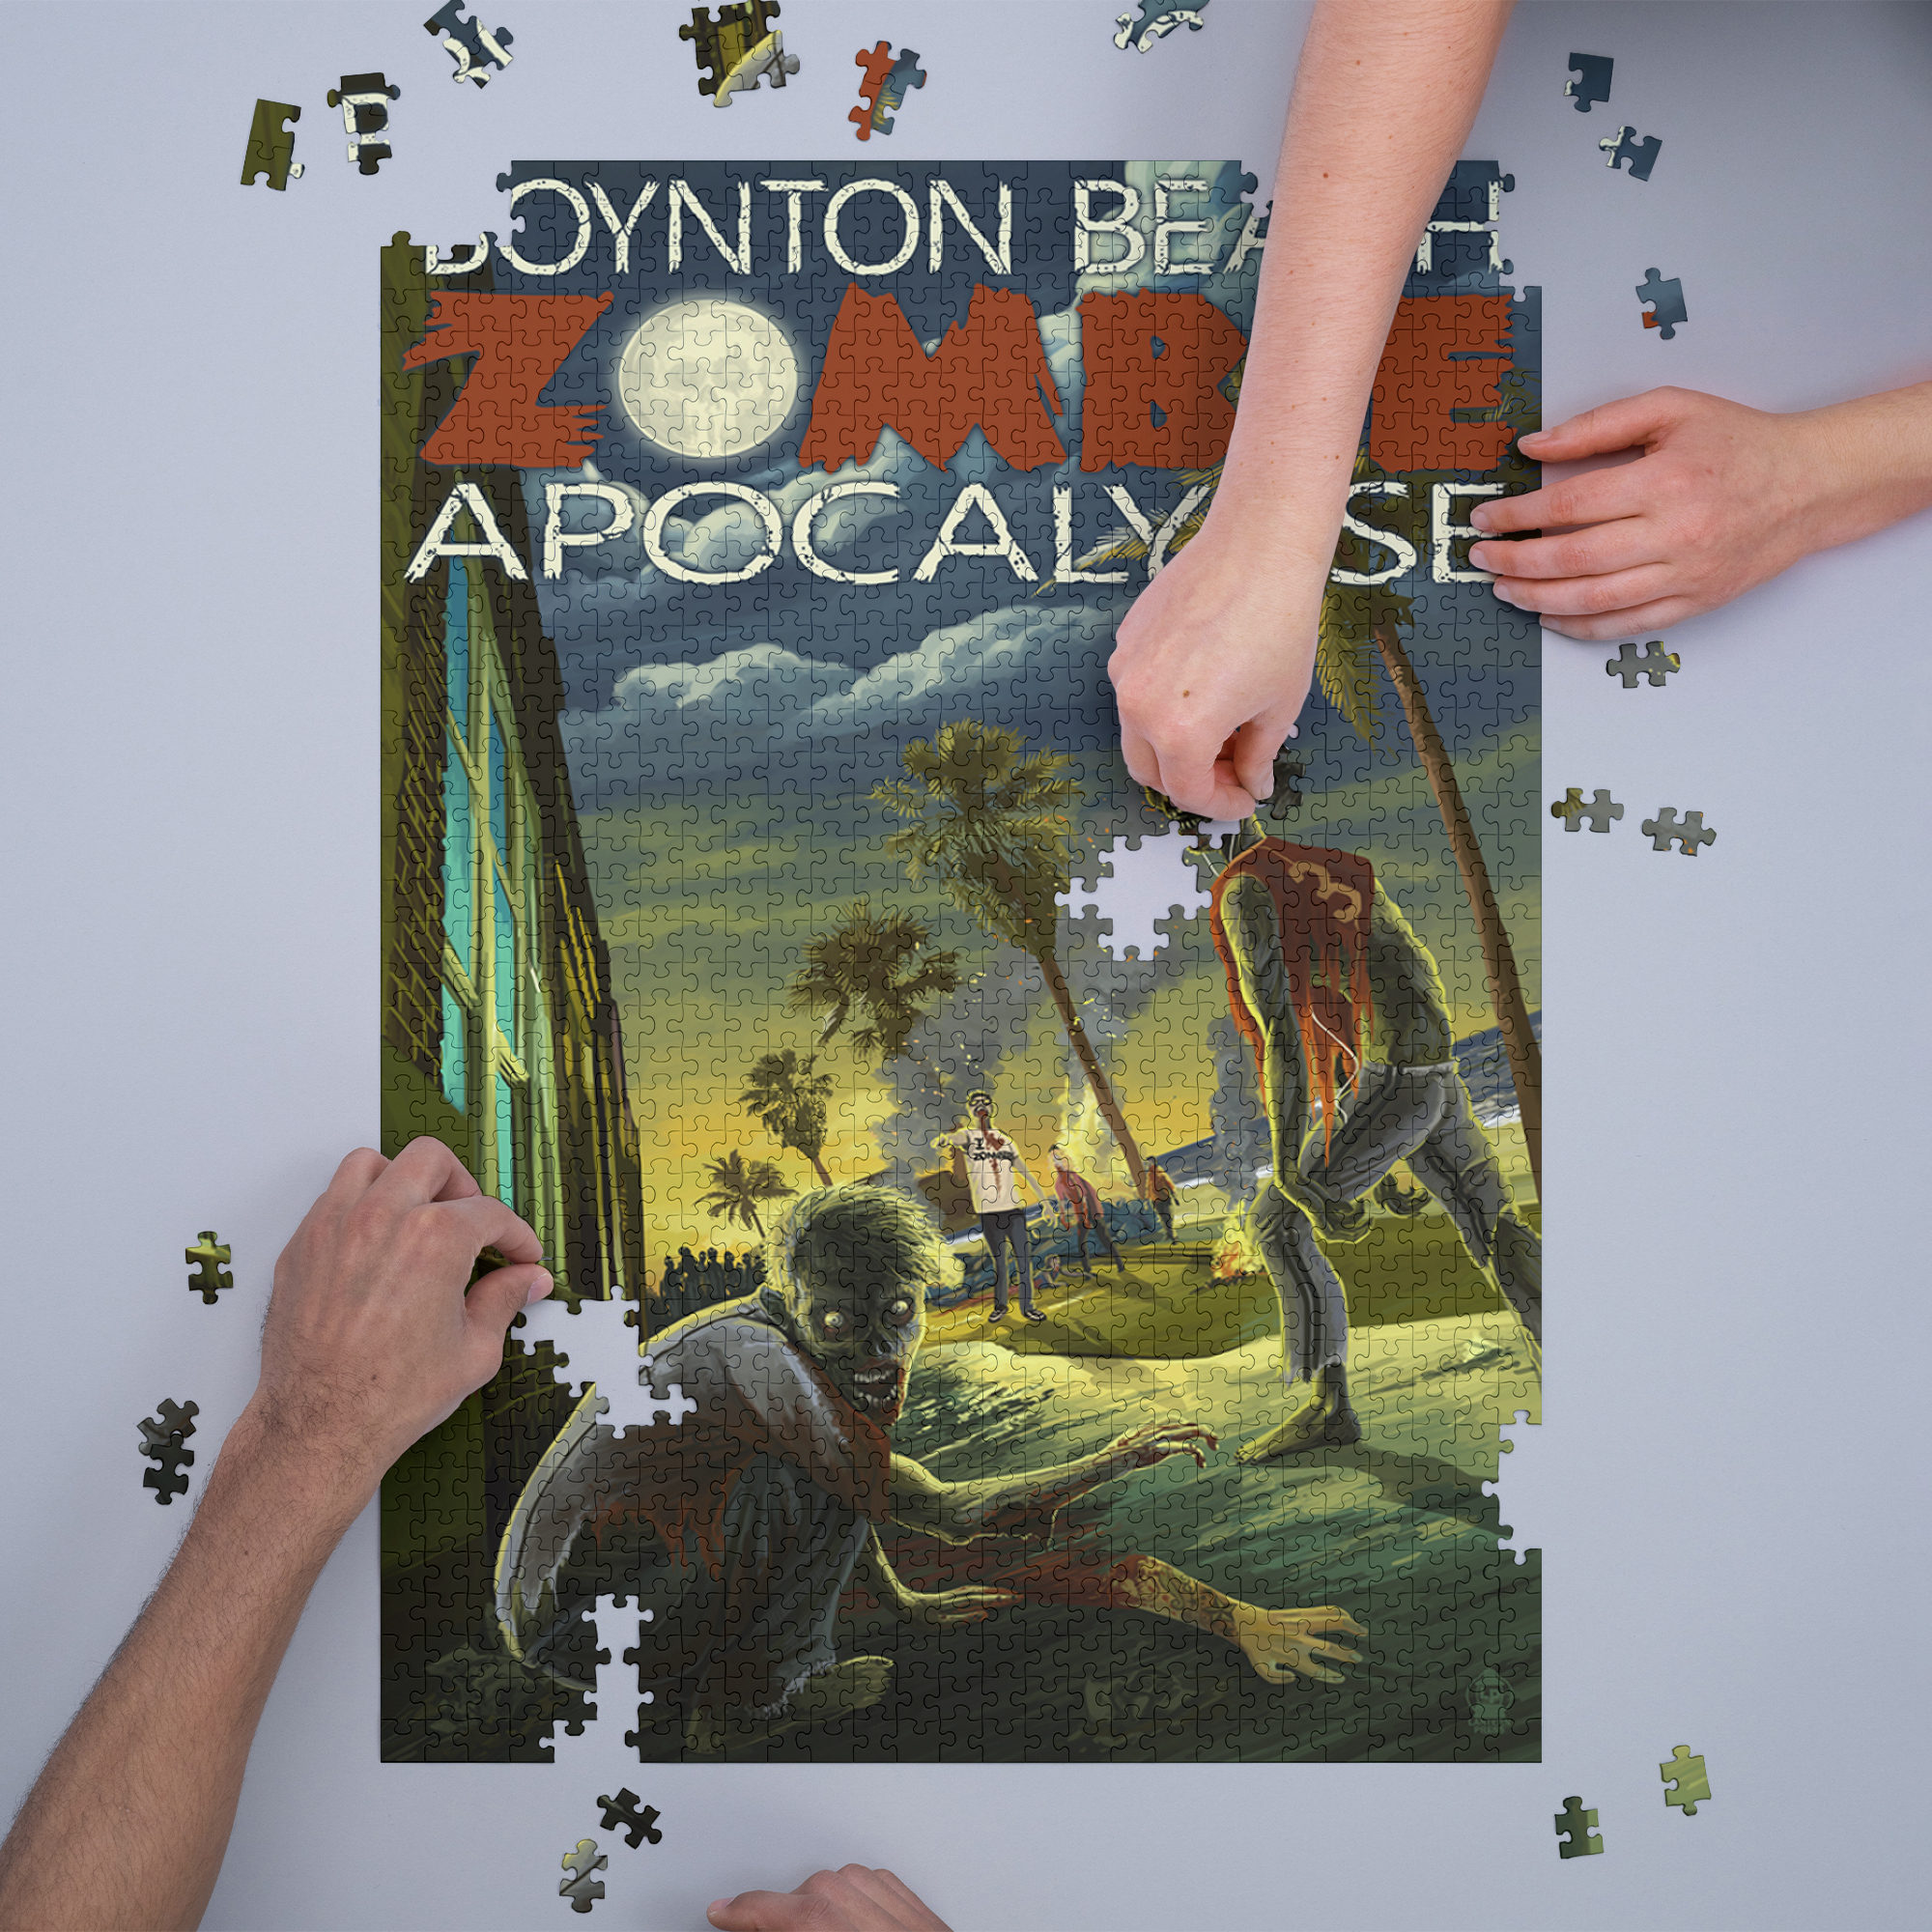 Boynton Beach, Florida, Zombie Apocalypse (1000 Piece Puzzle, Size 19x27, Challenging Jigsaw Puzzle for Adults and Family, Made in USA) - image 3 of 4